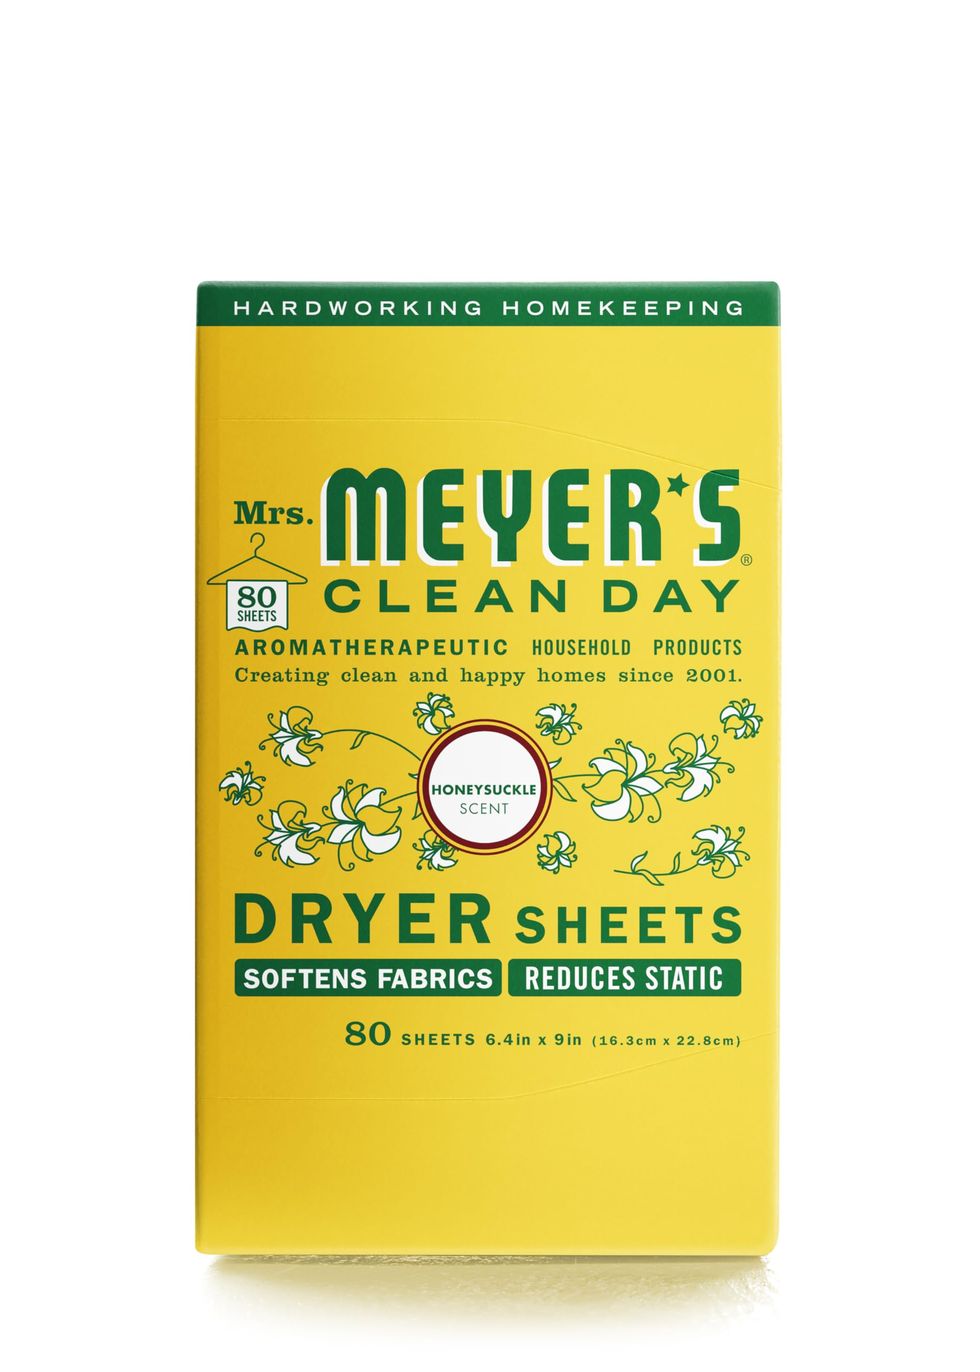 We Asked an Expert: What Do Dryer Sheets Do?